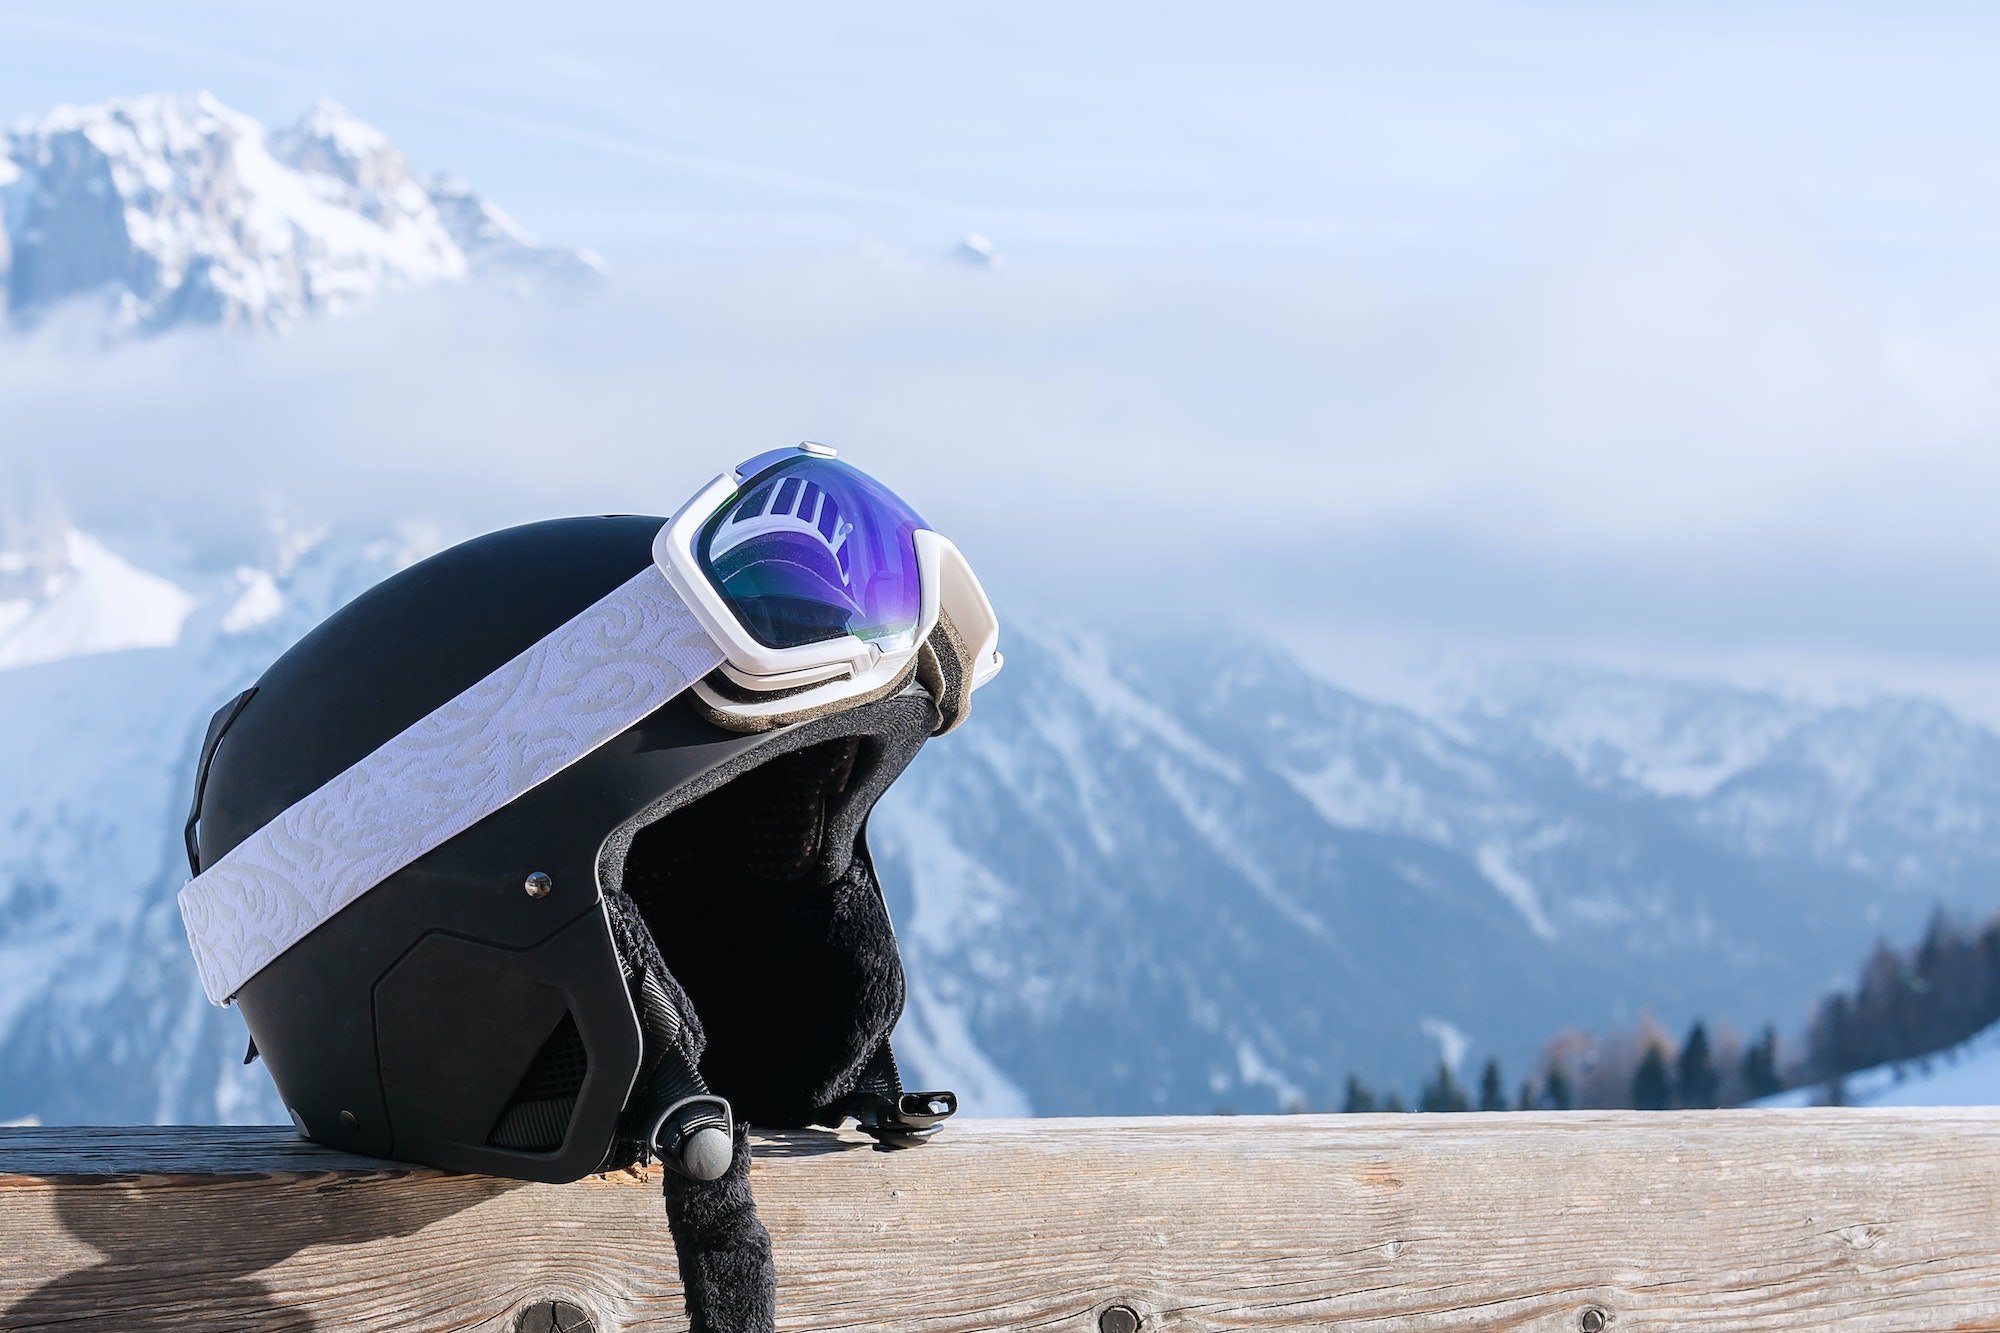 View of ski helmet with sunglasses on the background of snow-capped mountains. Landscape, industry